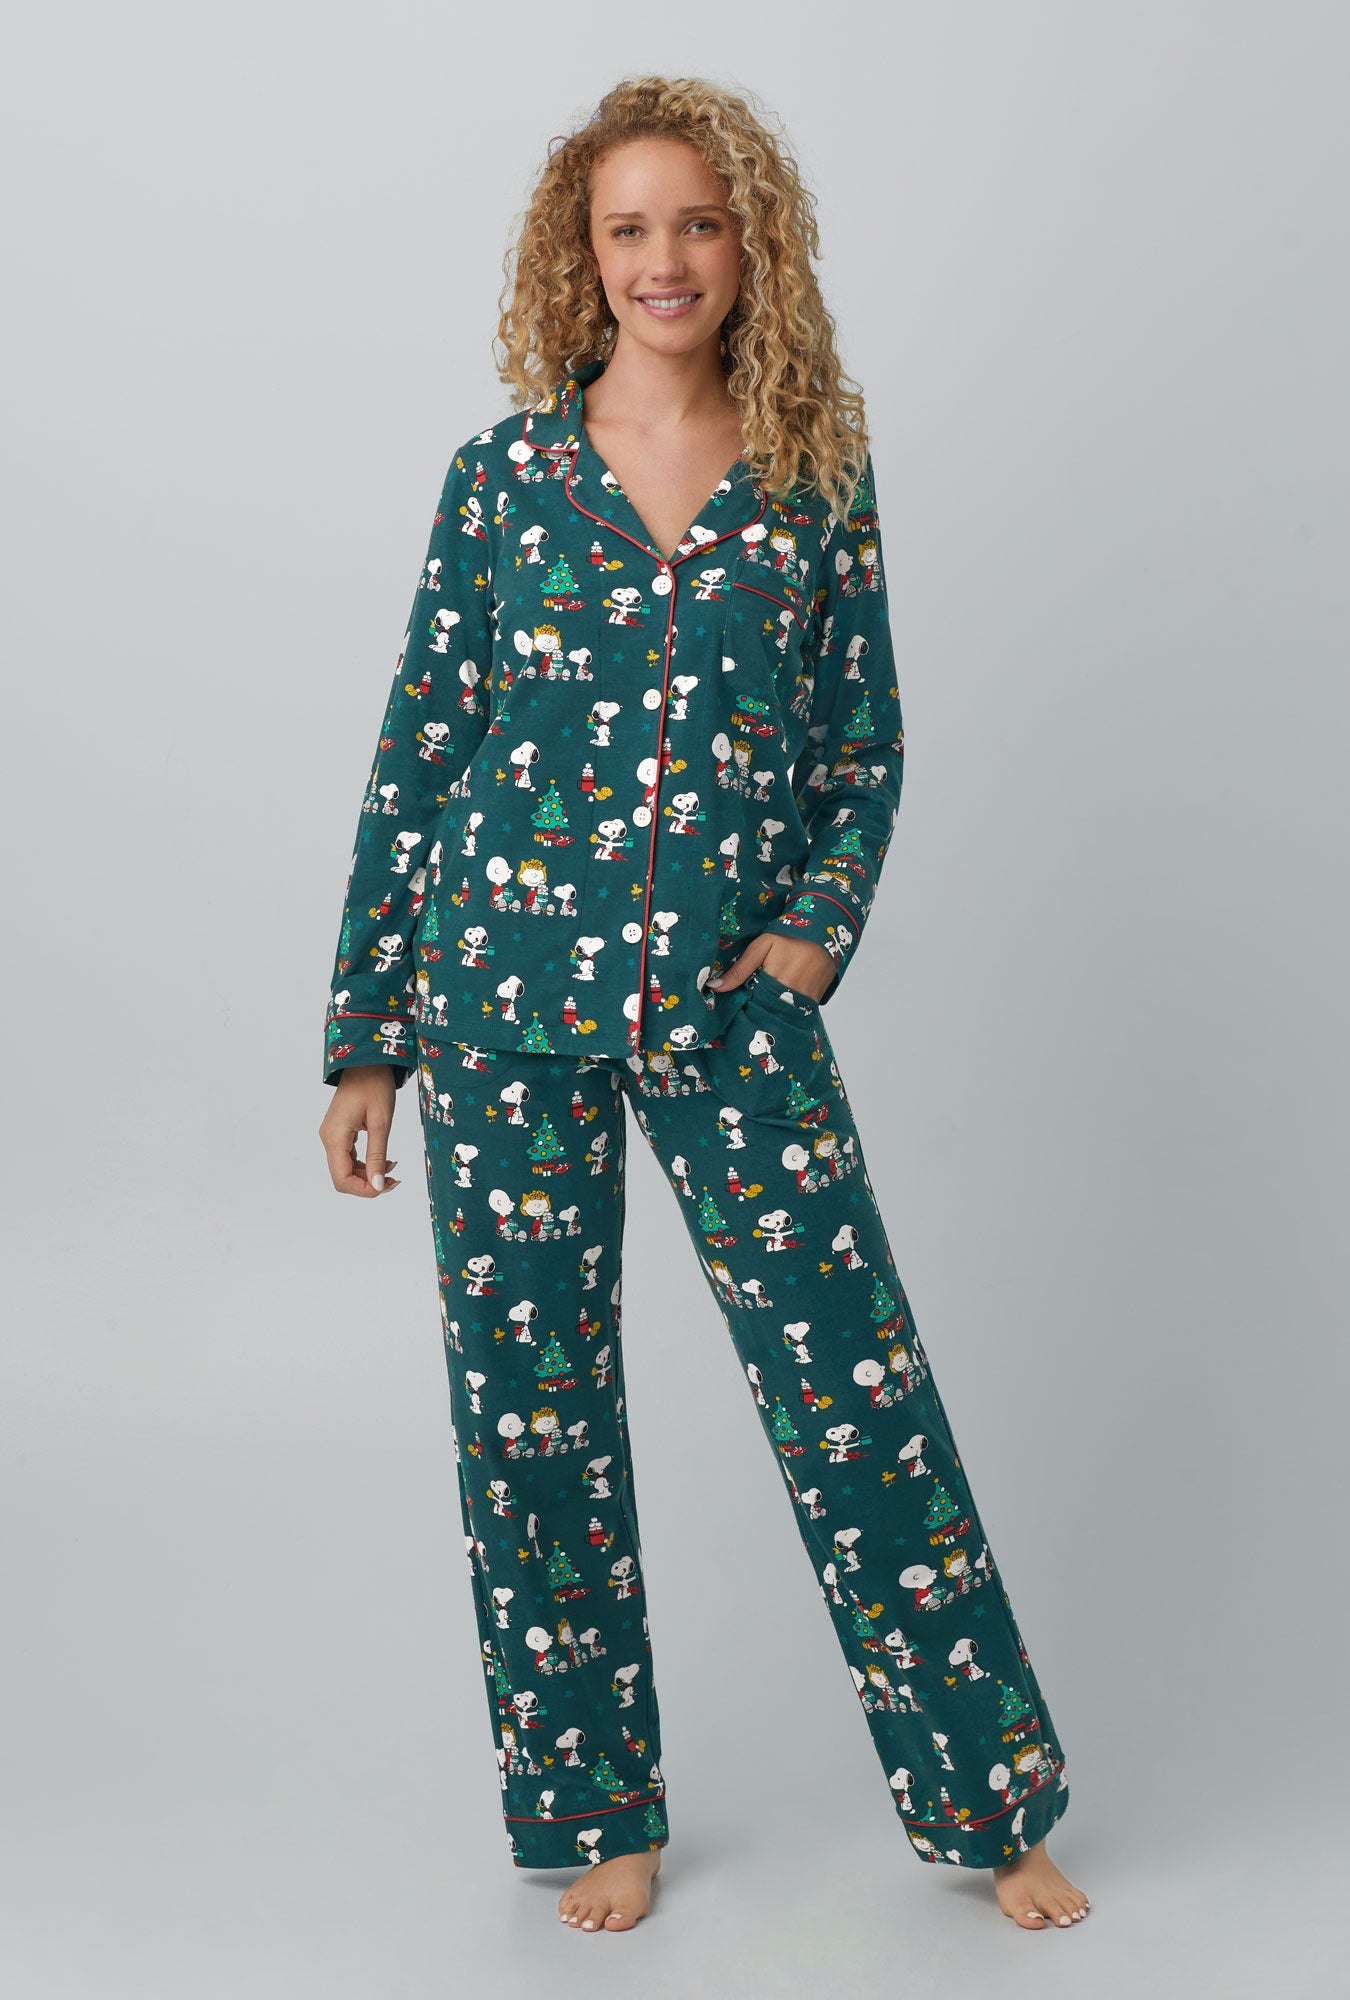 A lady wearing green Long Sleeve Classic Stretch Jersey PJ Set with Snoopy's Cocoa print